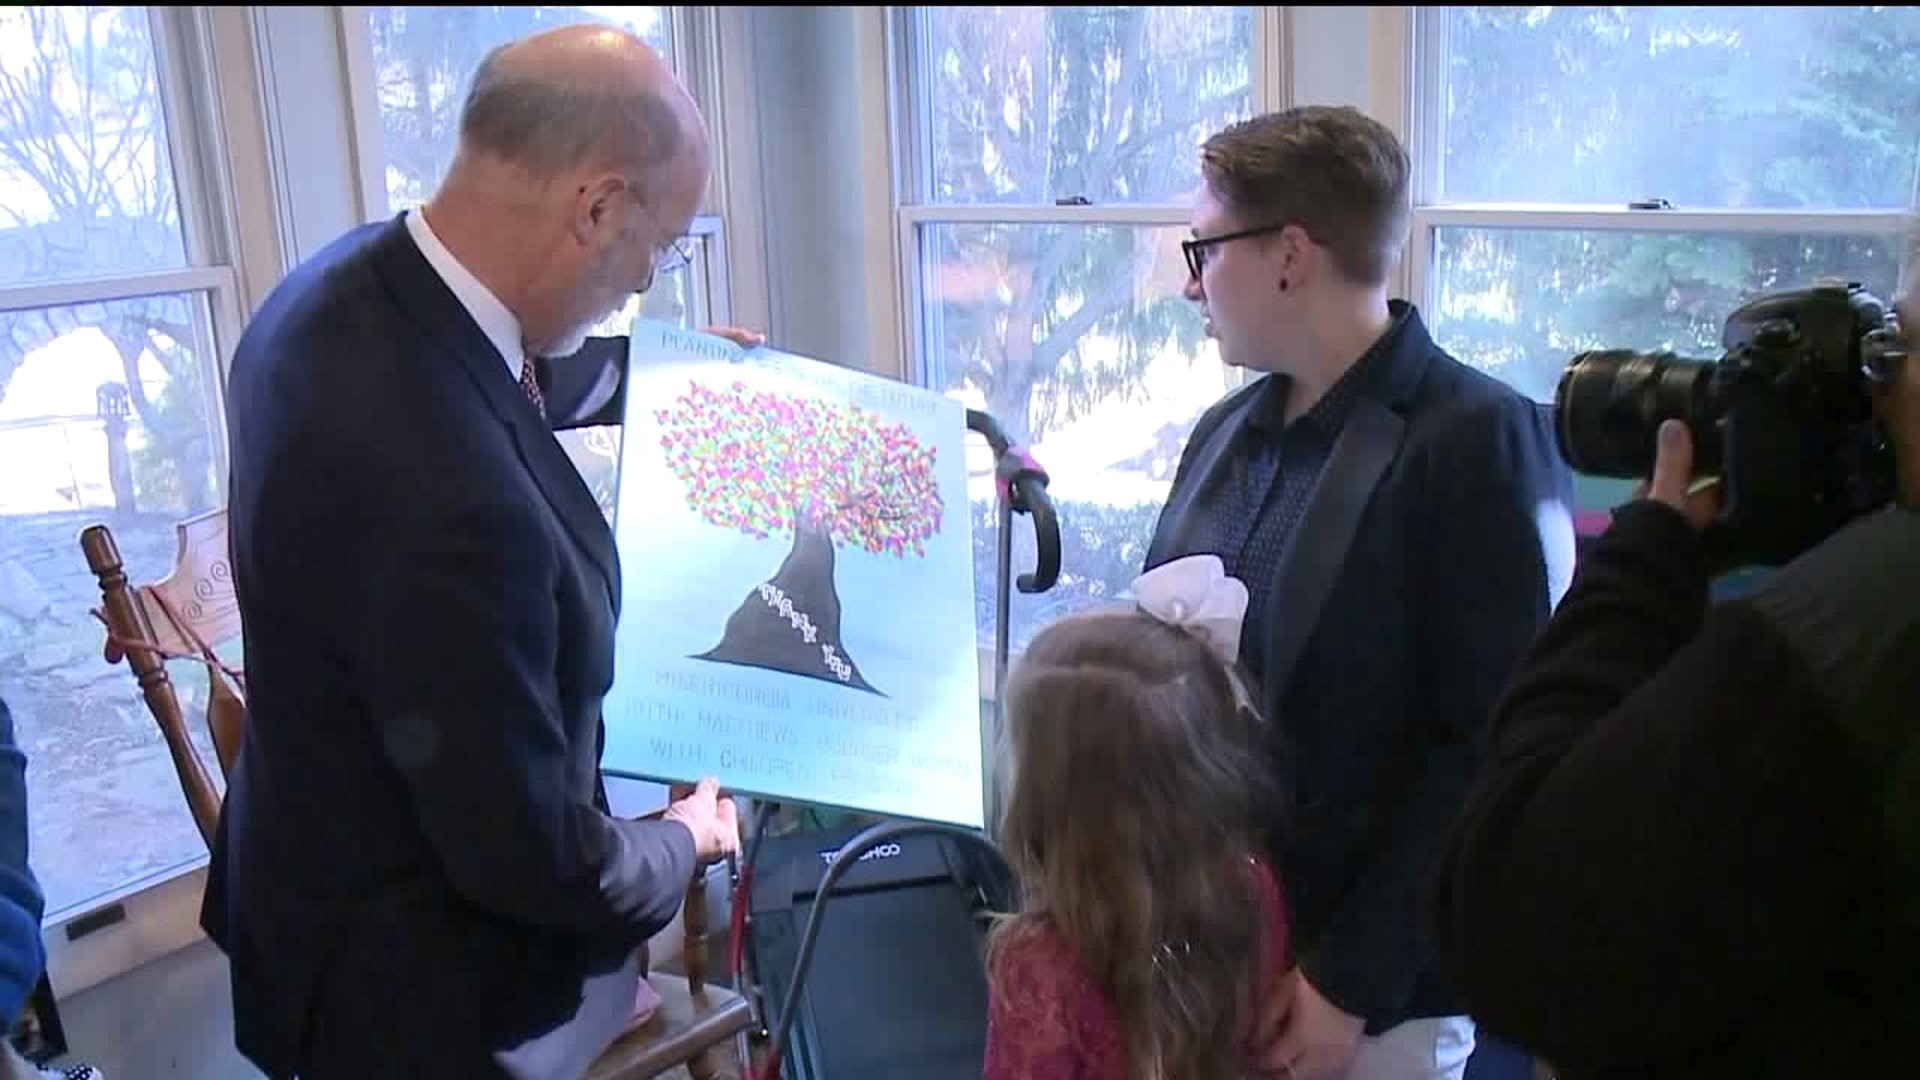 Governor Visits Misericordia to Promote Women with Children Program